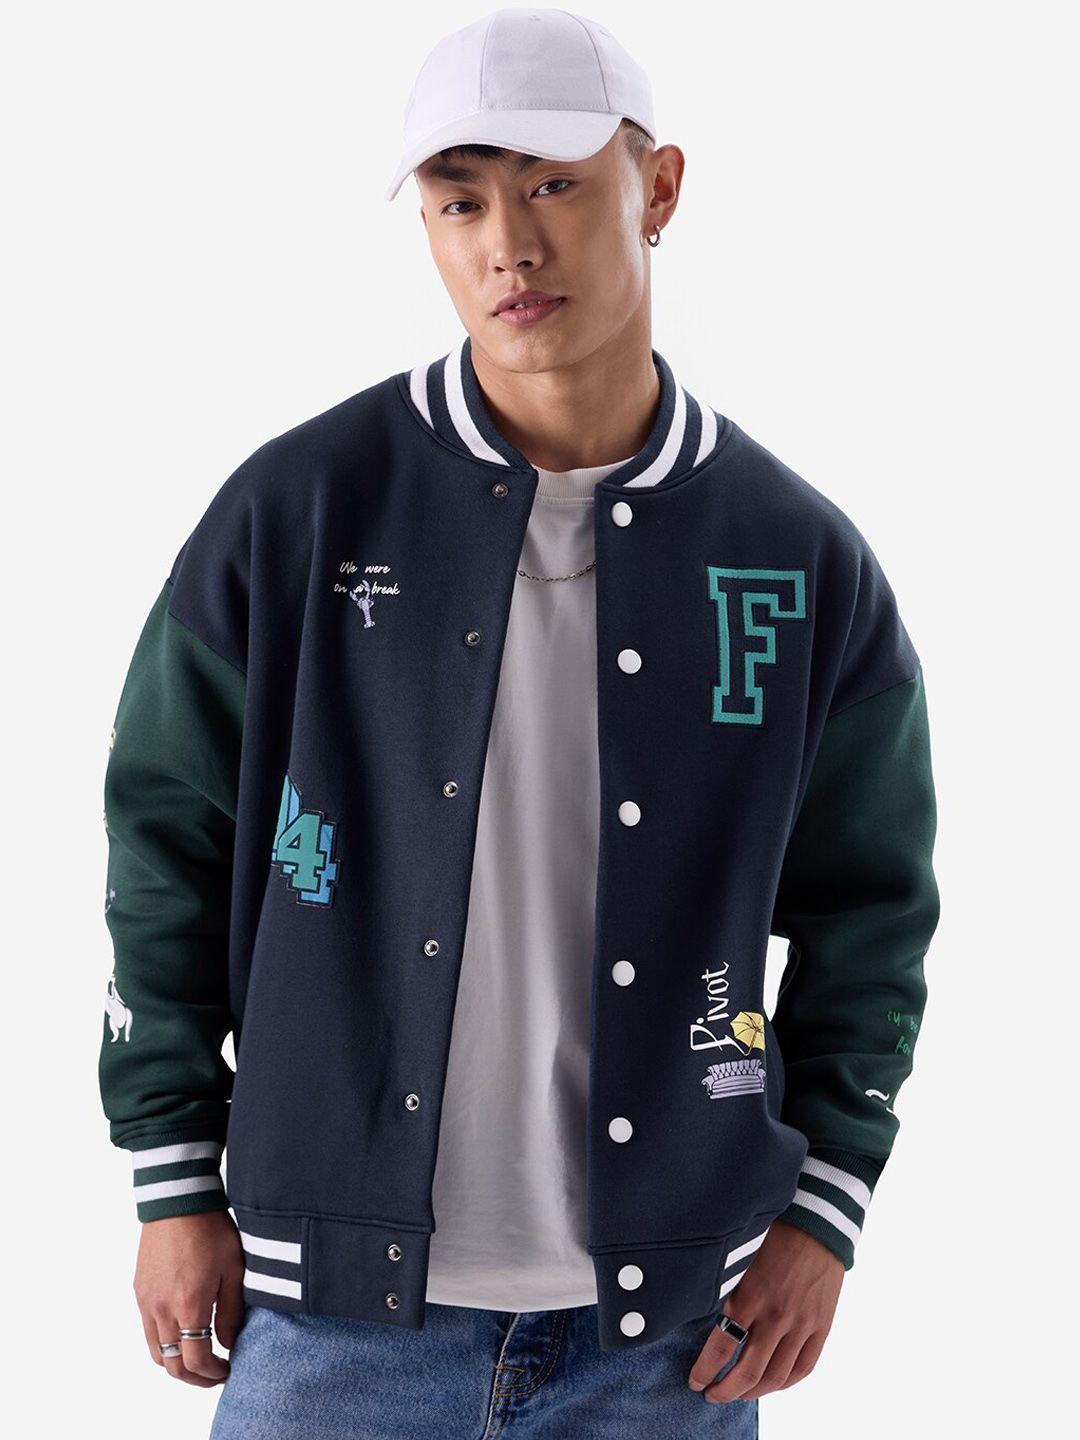 the souled store navy blue typography printed stand collar lightweight bomber jacket